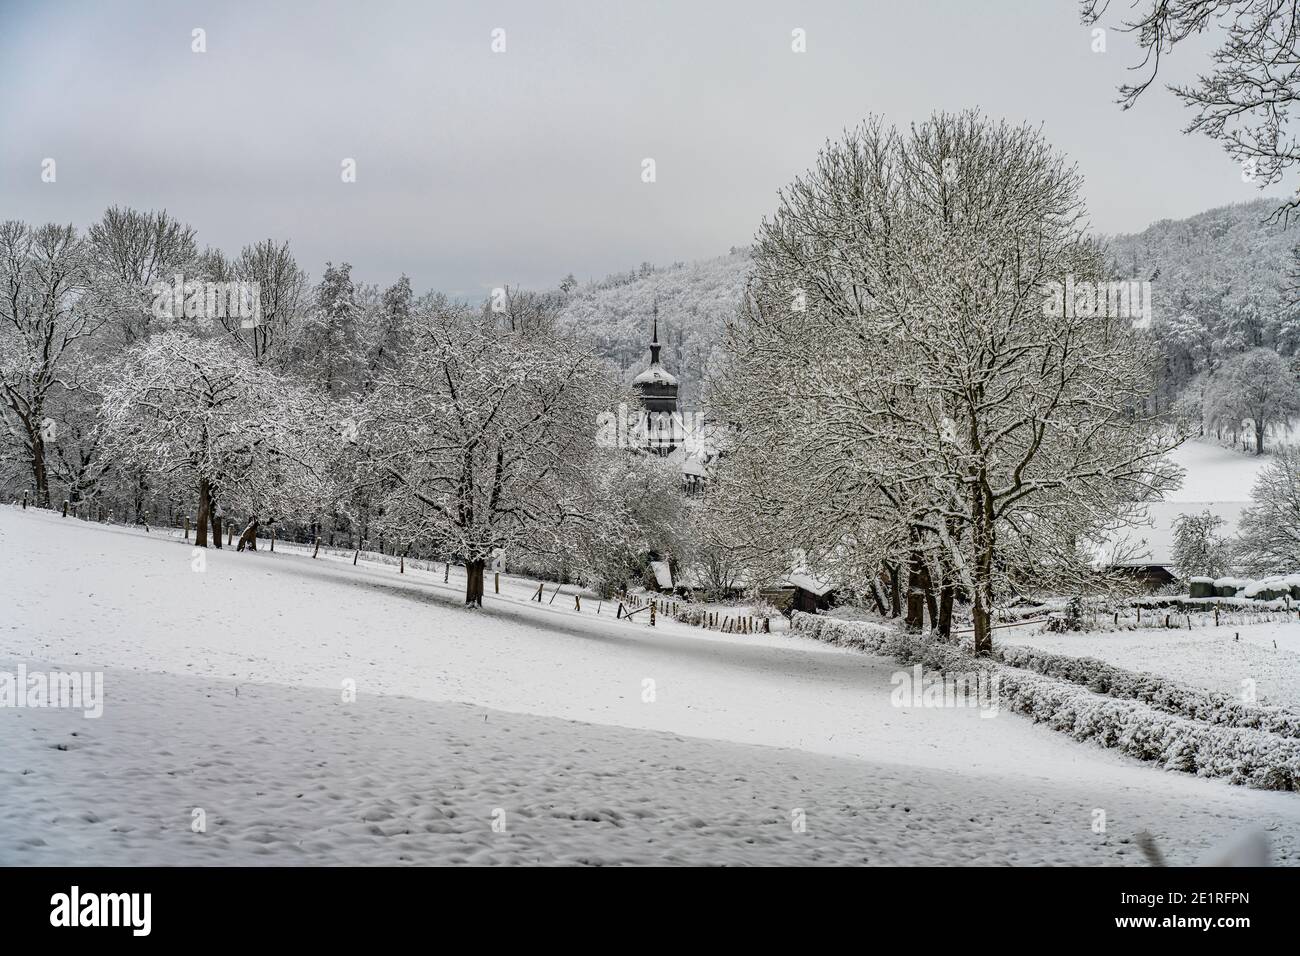 Am Schloß High Resolution Stock Photography and Images - Alamy